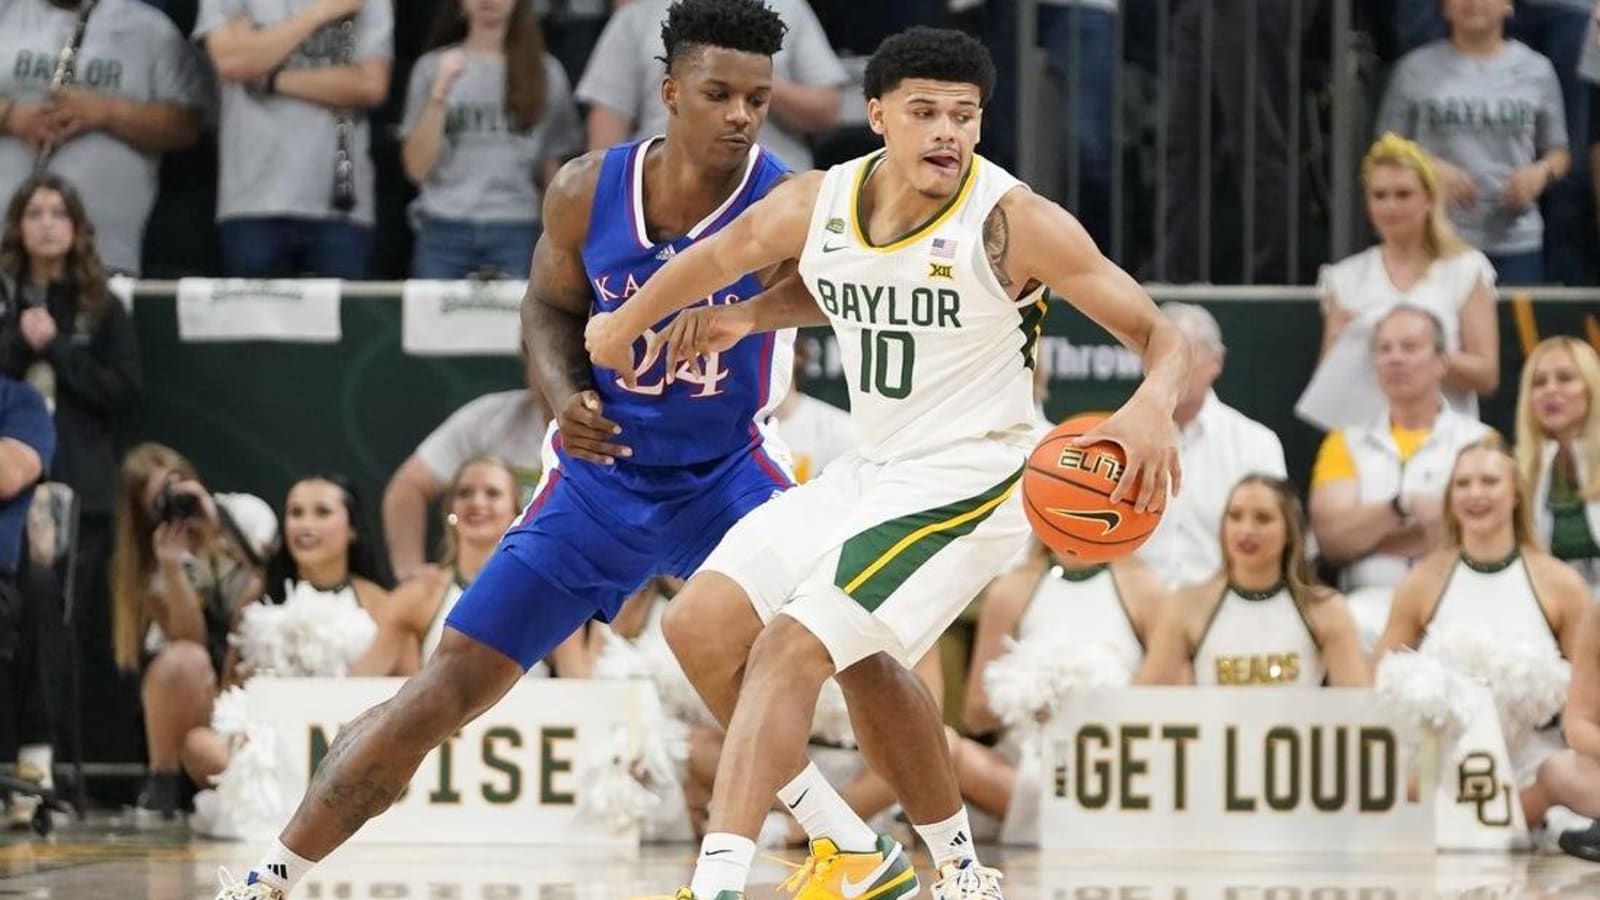 No. 15 Baylor upends No. 7 Kansas in battle for third place